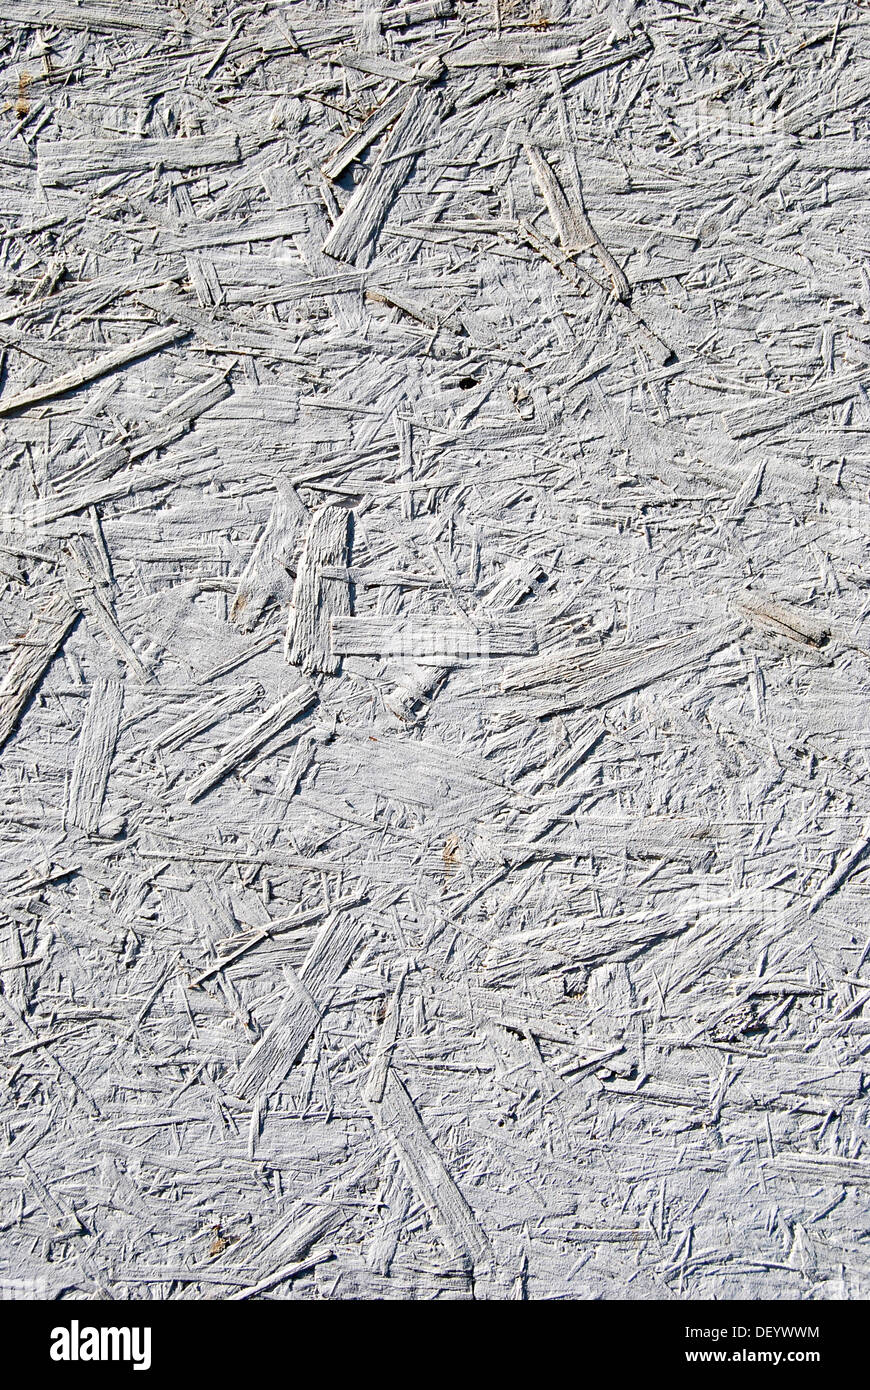 Painted particle board, pressed coarse chips, fibers, building materials Stock Photo